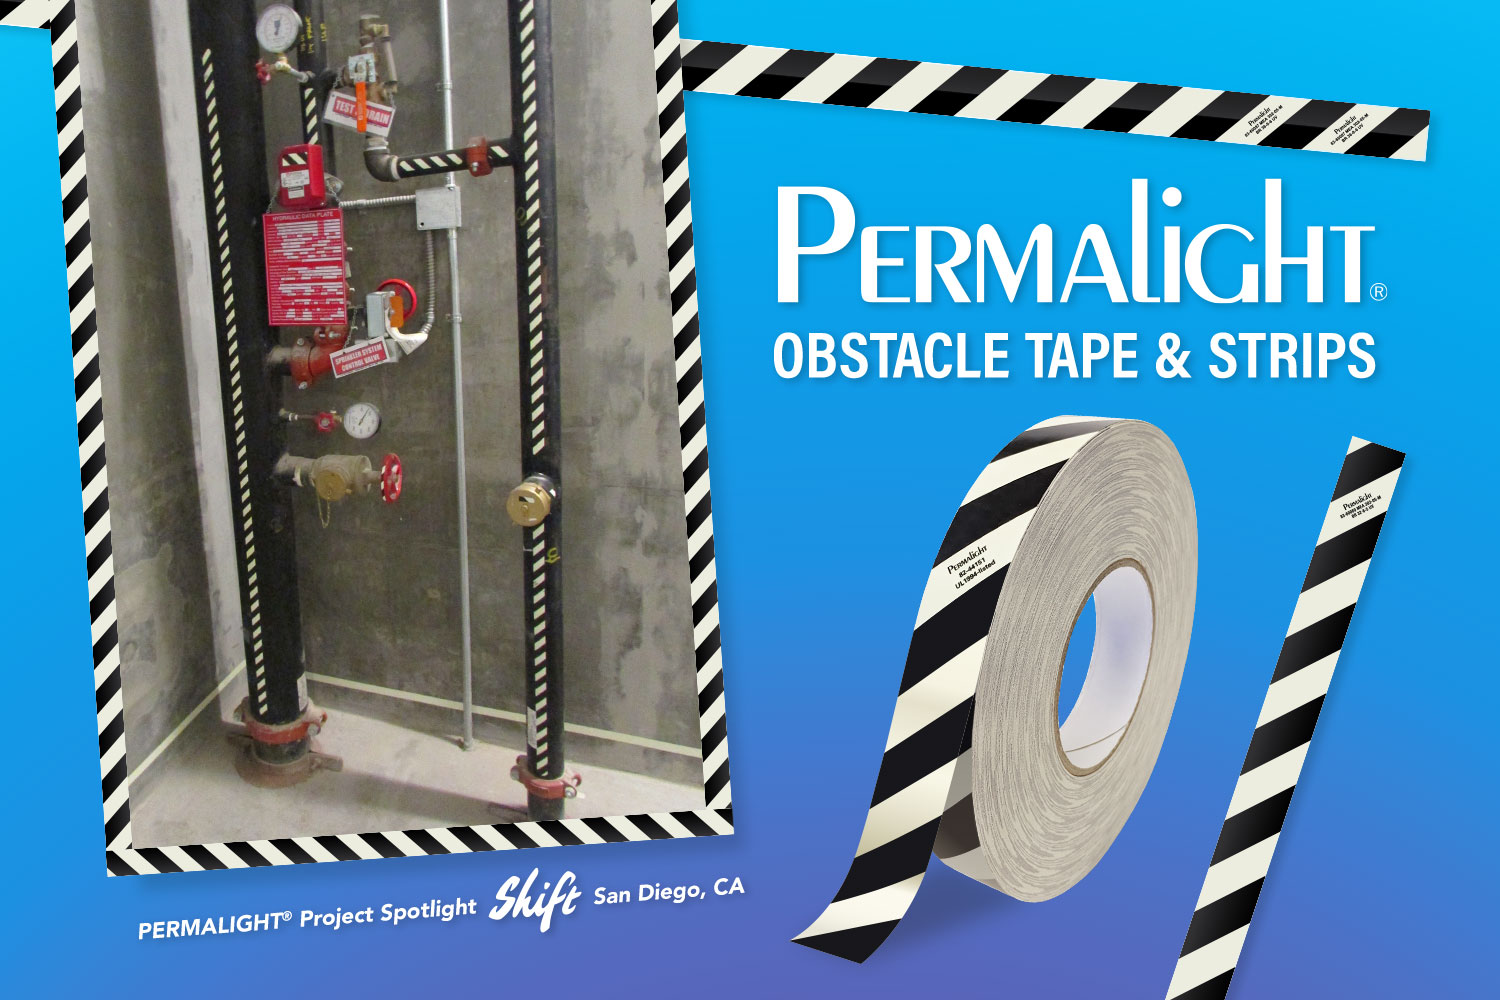 PERMALIGHT® Obstacle Marking Tape & Strips